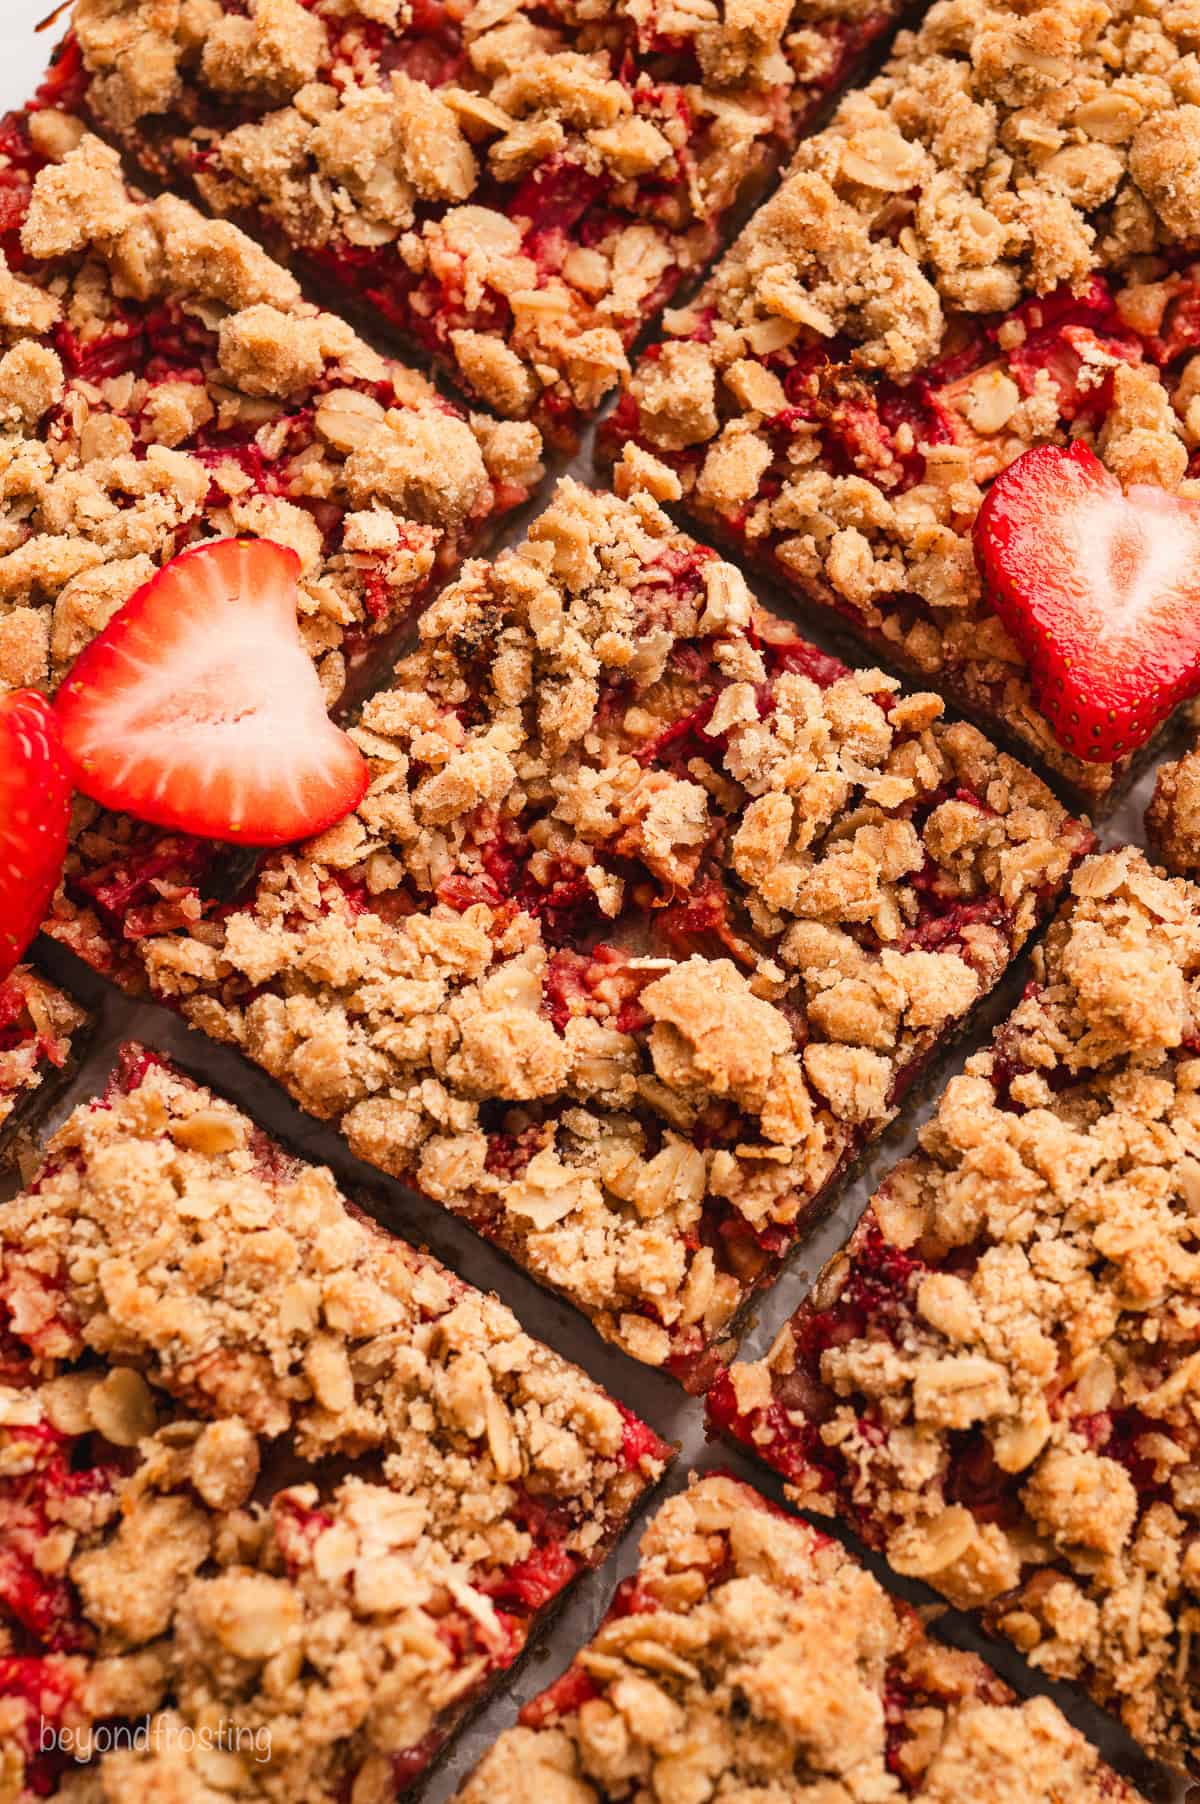 Overhead close up view of freshly cut strawberry rhubarb bars garnished with two fresh strawberry slices.